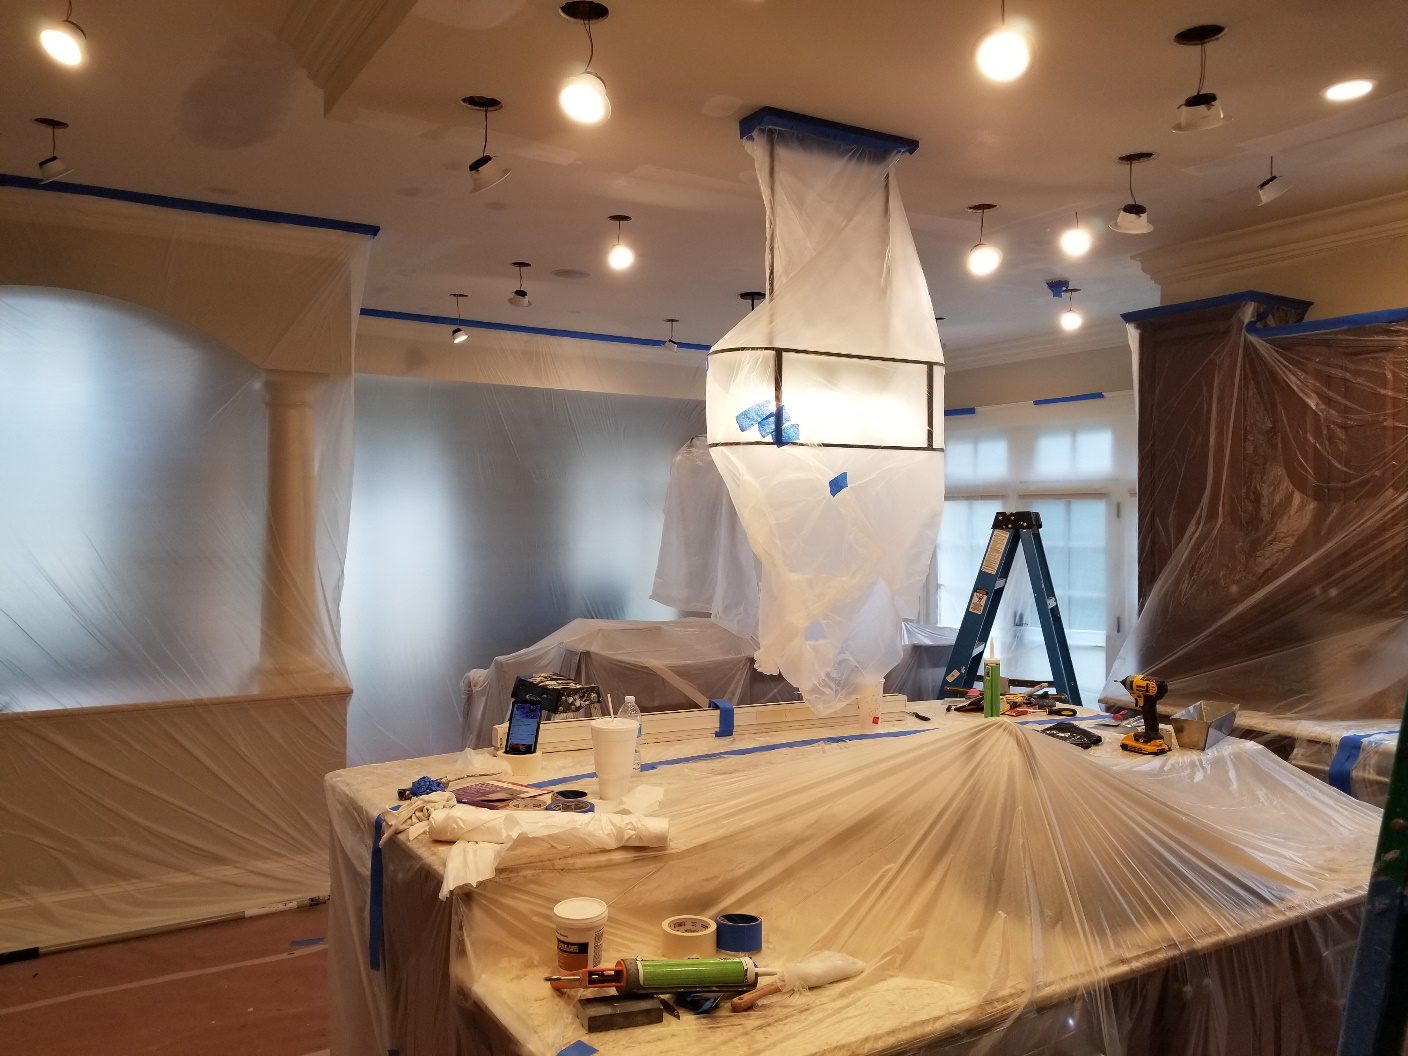 A room being remodeled with paint and construction supplies.